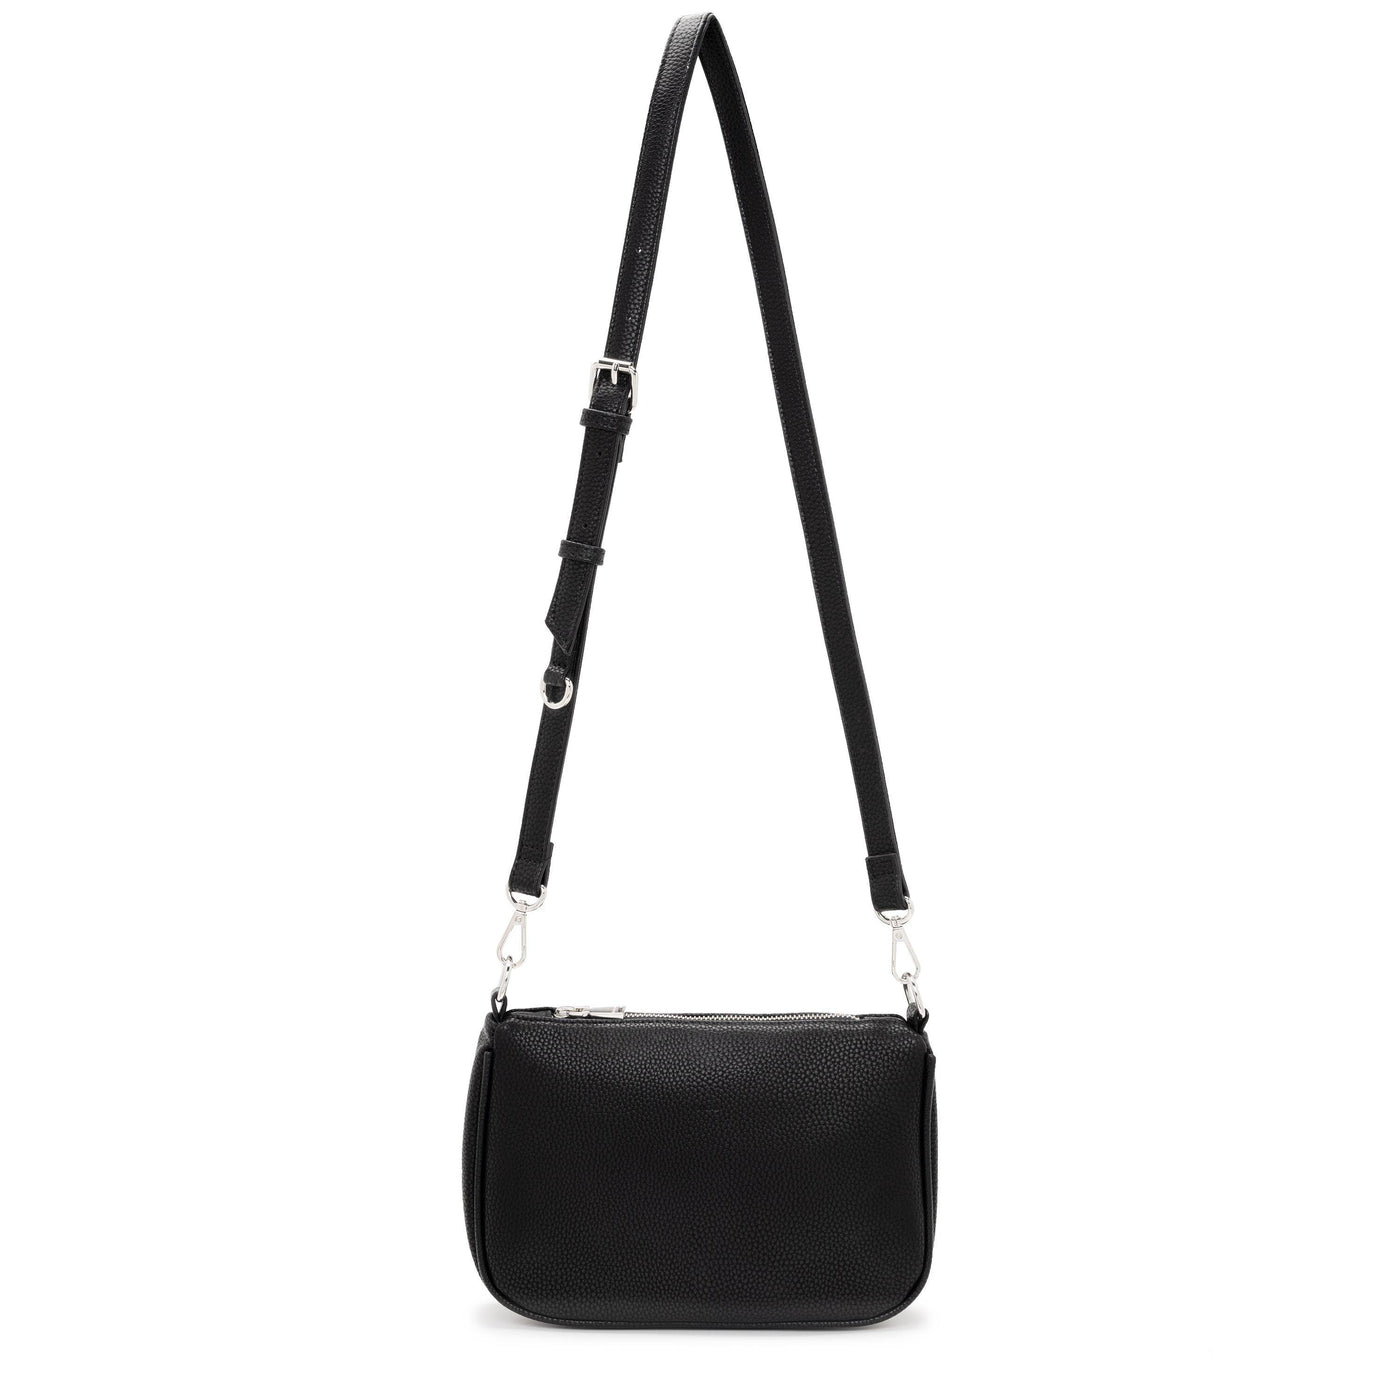 Co-Lab Vola crossbody with pouch // Black